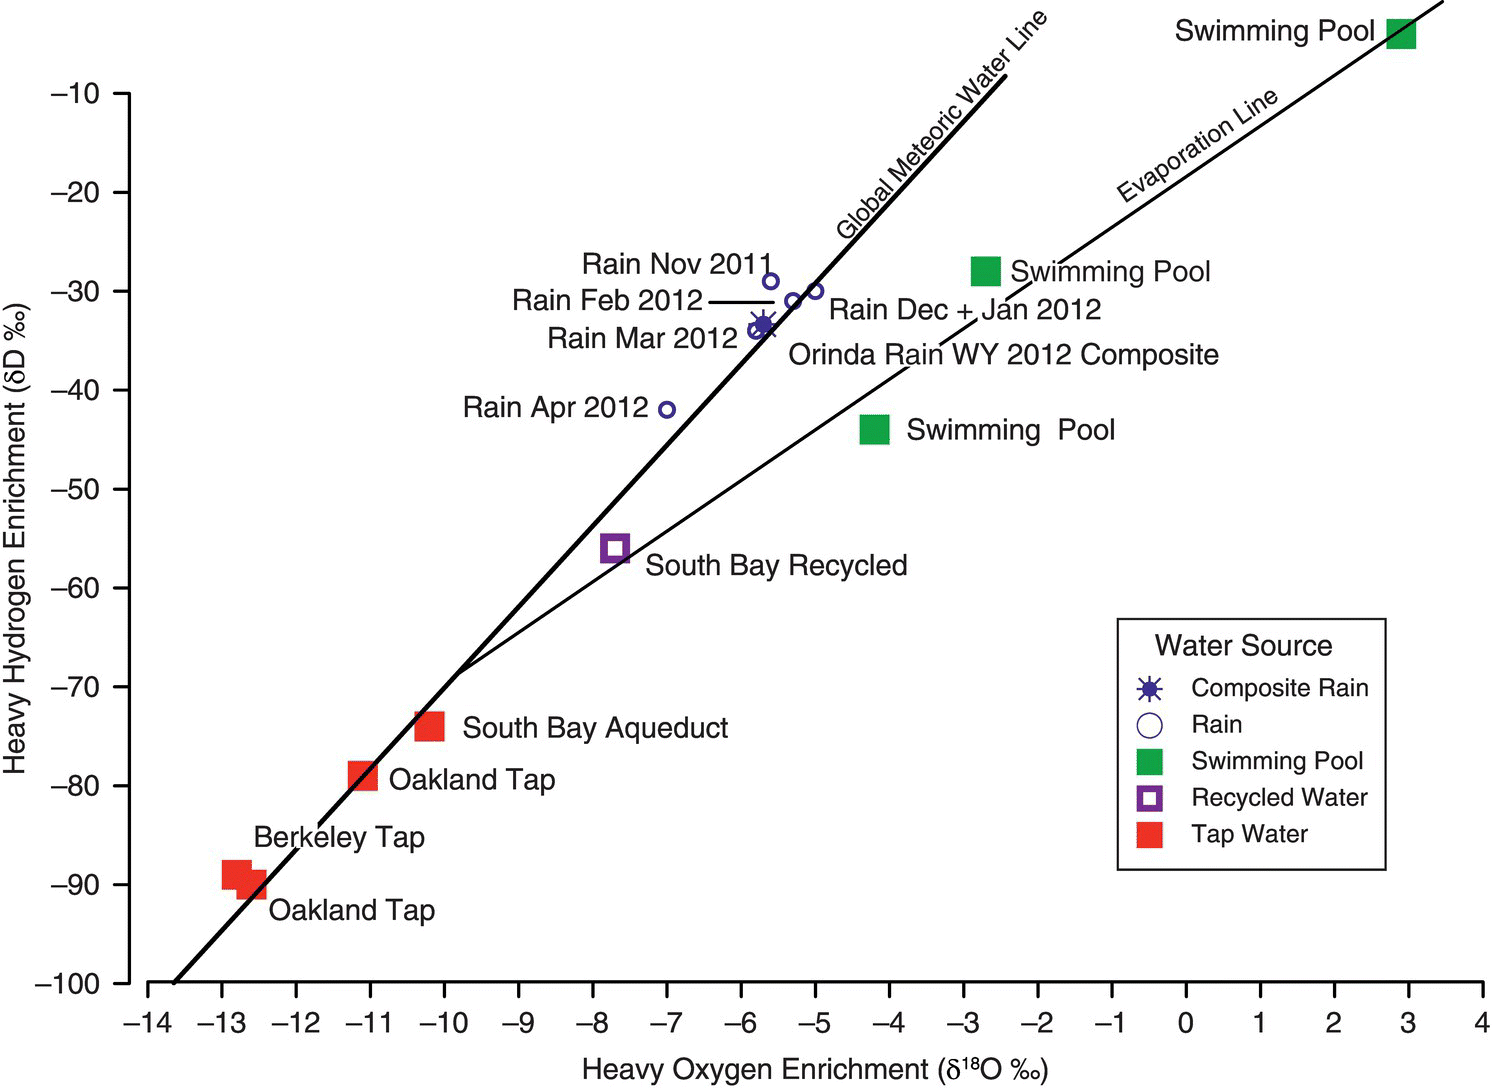 Graph illustrating stable isotope ratios of water to differentiate water sources, displaying 2 ascending lines with markers representing composite rain, rain, swimming pool, recycled water, and tap water.